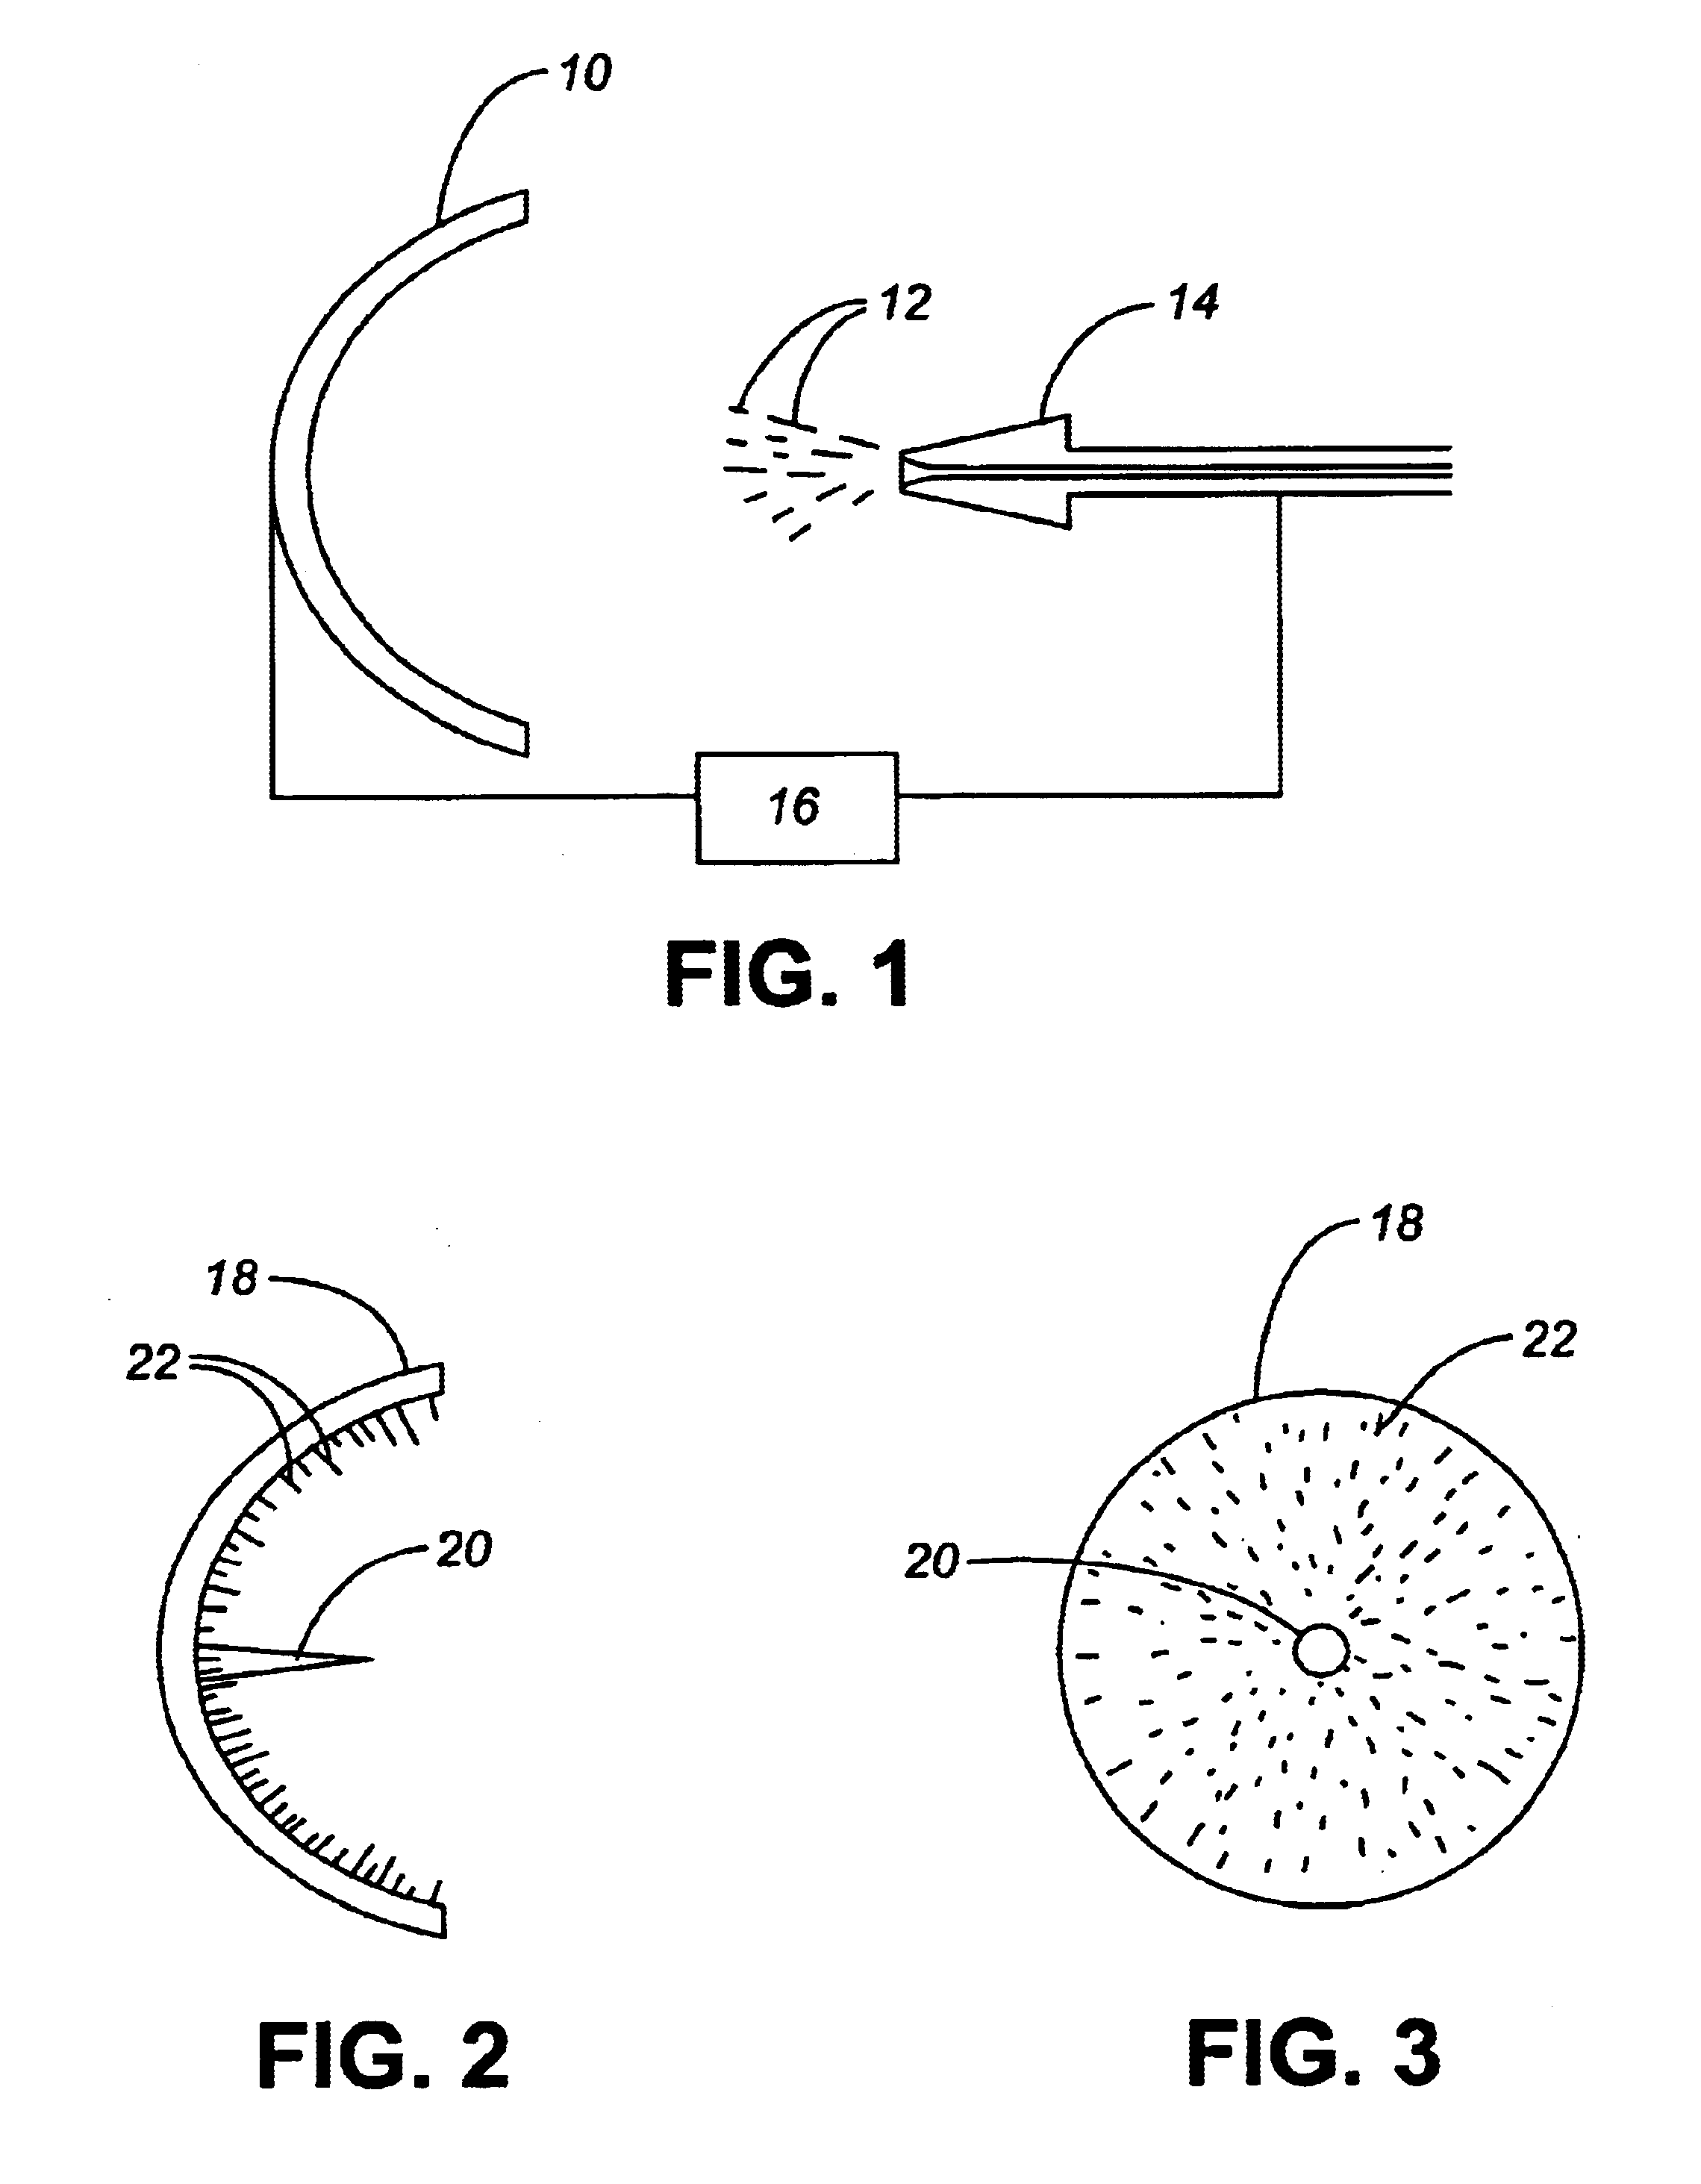 Ultrasonic process for autocatalytic deposition of metal on microparticulate